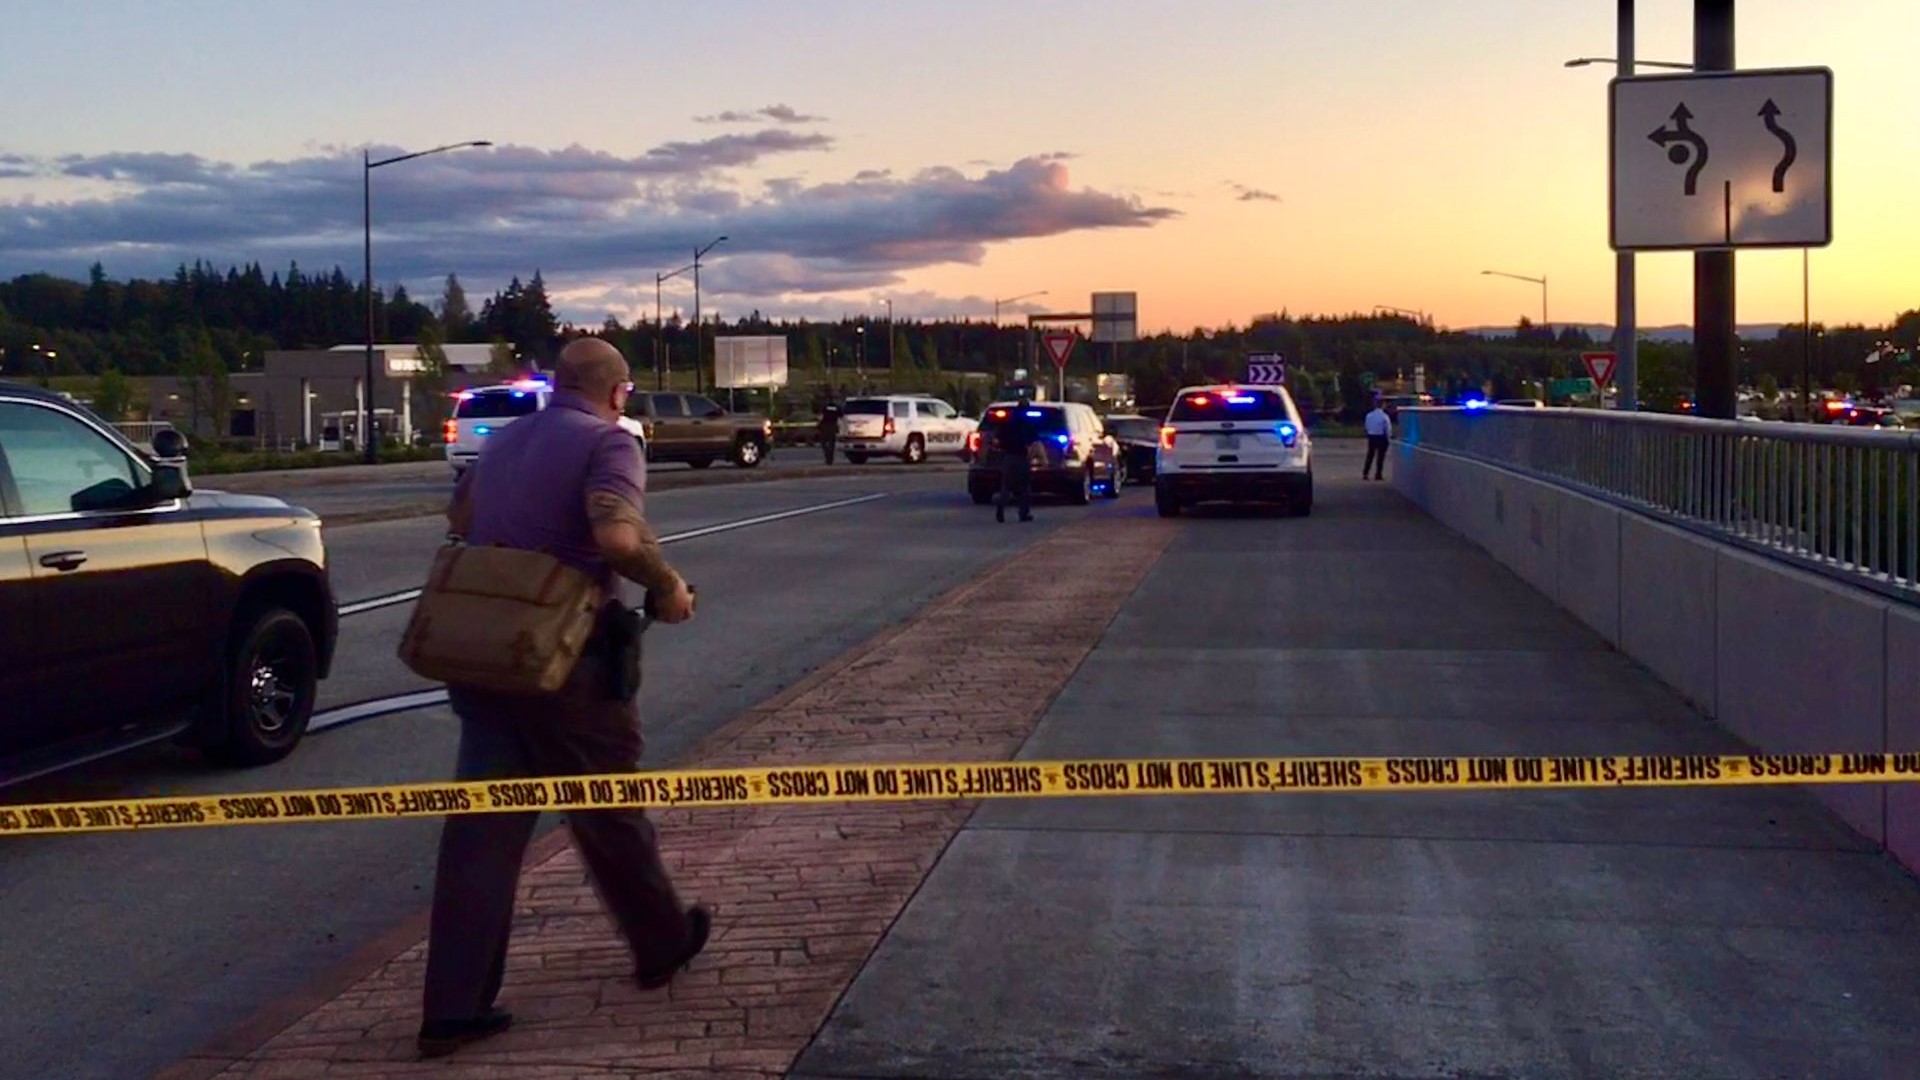 A man led police on a high-speed chase that ended with a shooting on an I-5 overpass.